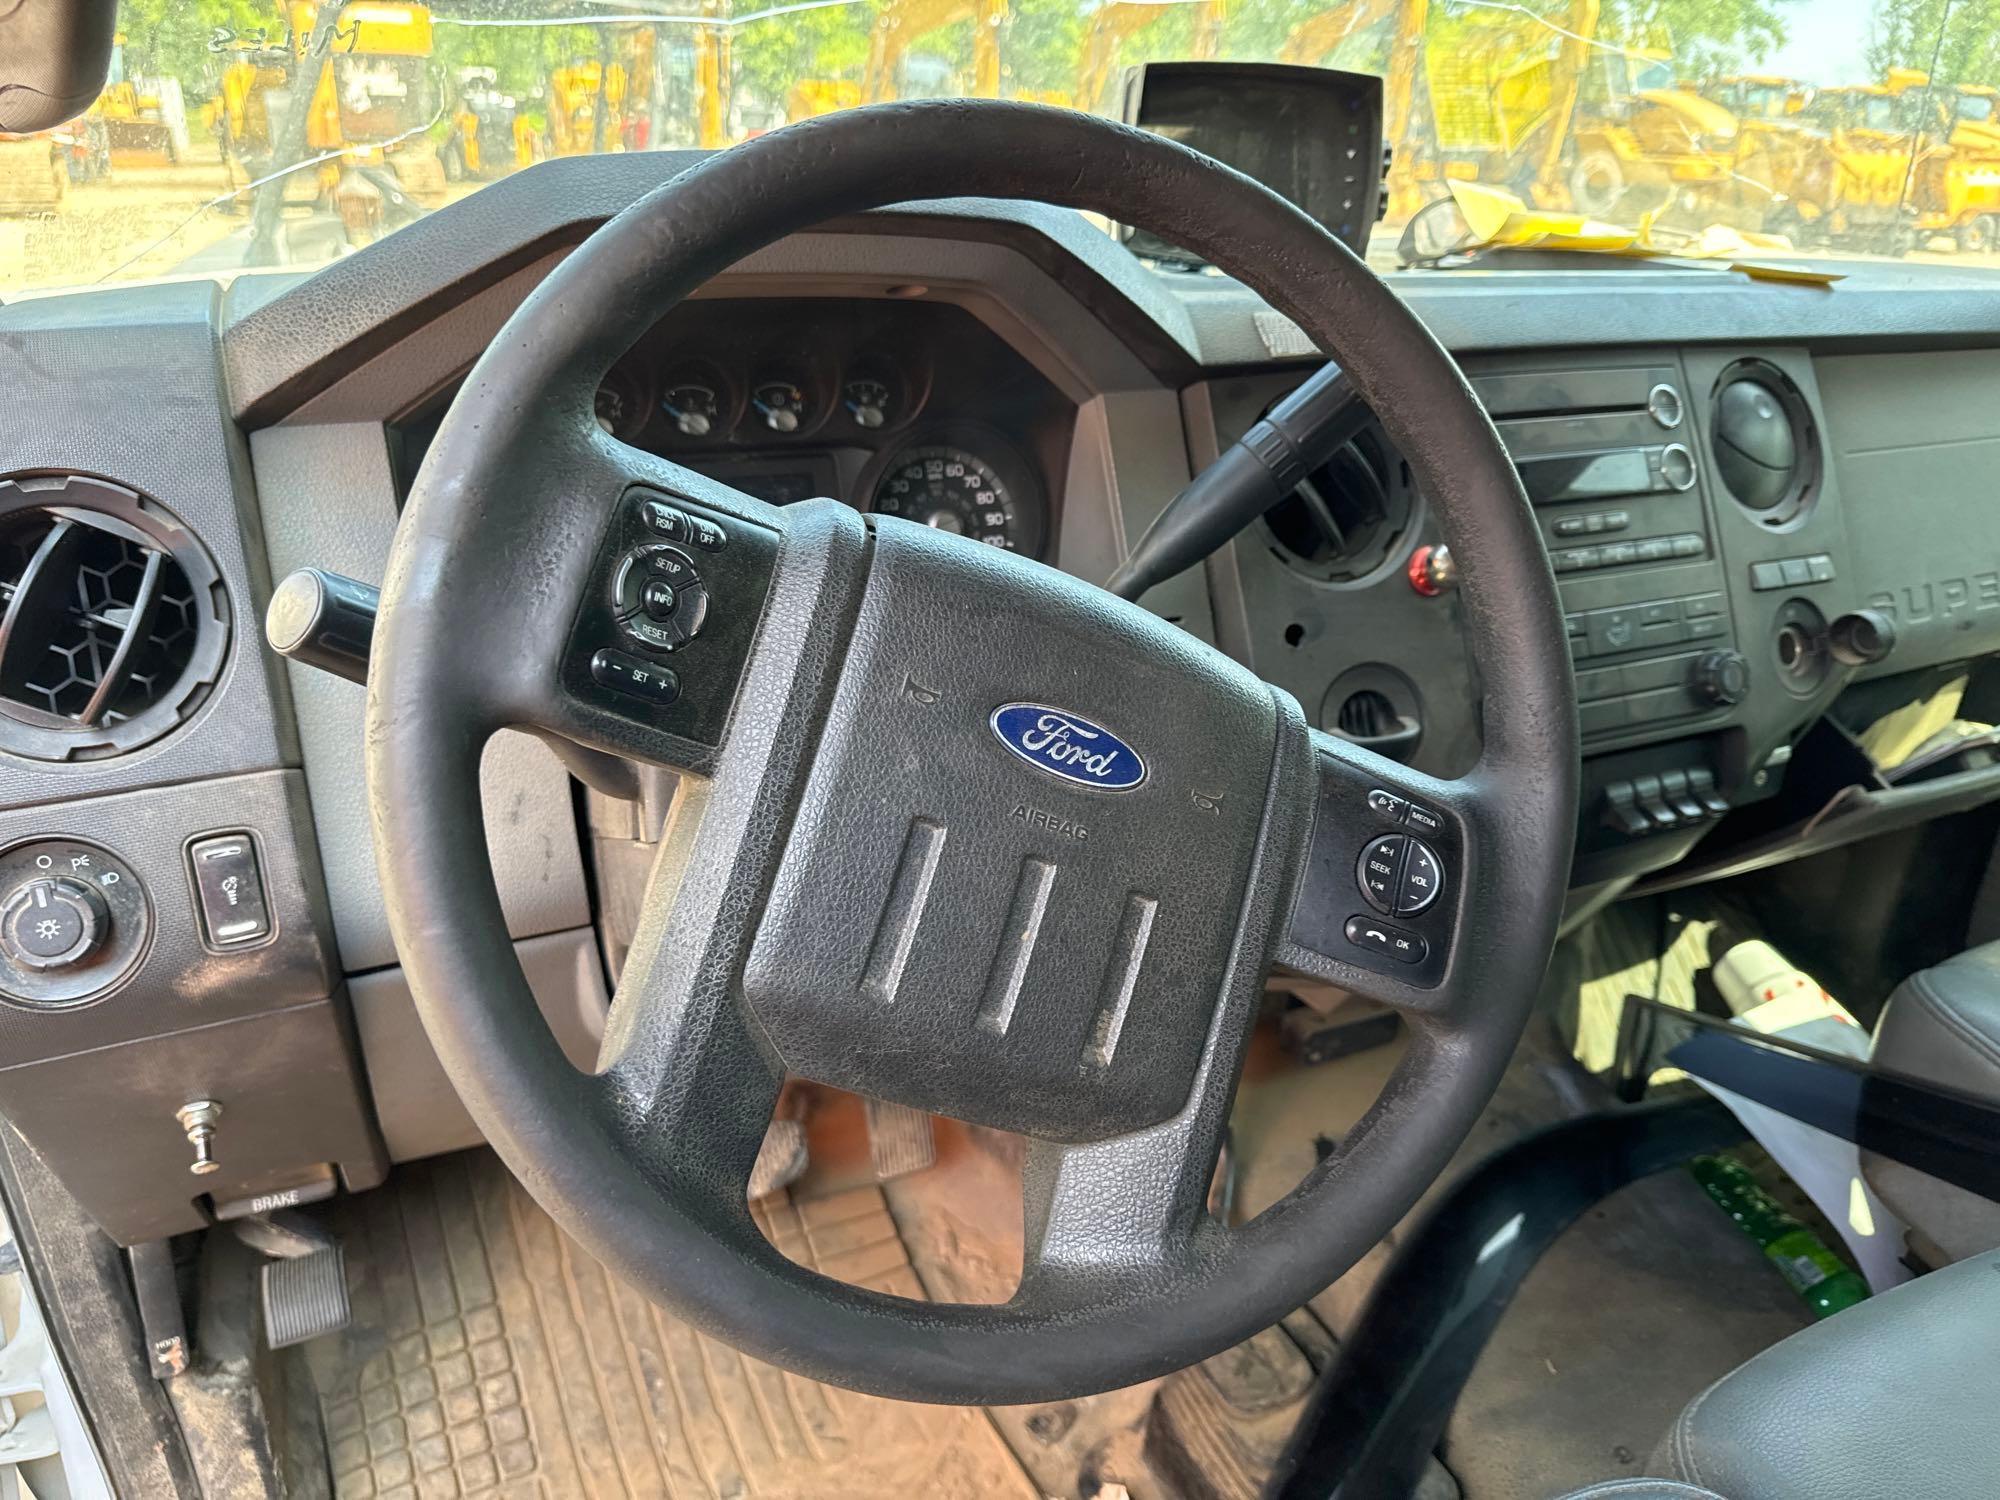 2015 FORD F550 UTILITY TRUCK VN:C26013 4x4, powered by gas engine, equipped with auto transmission,